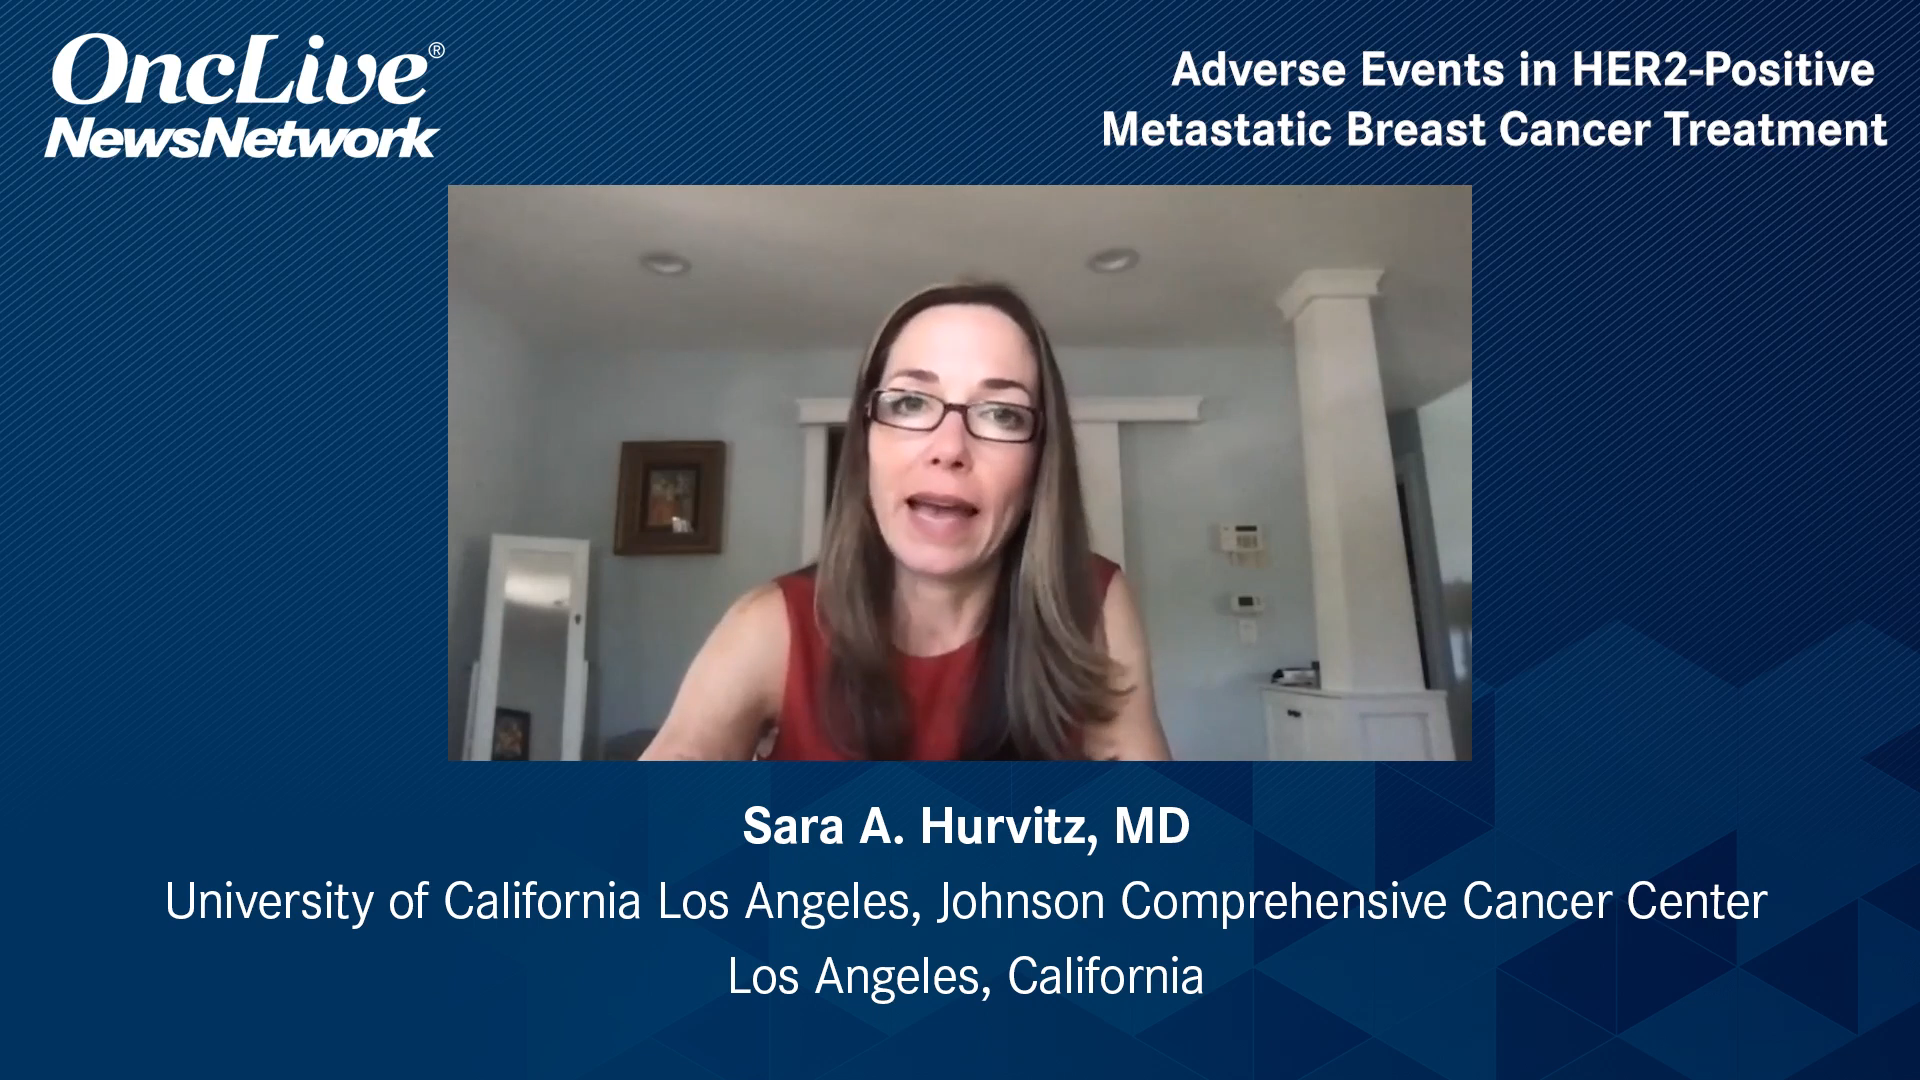 Adverse Events in HER2-Positive Metastatic Breast Cancer Treatment